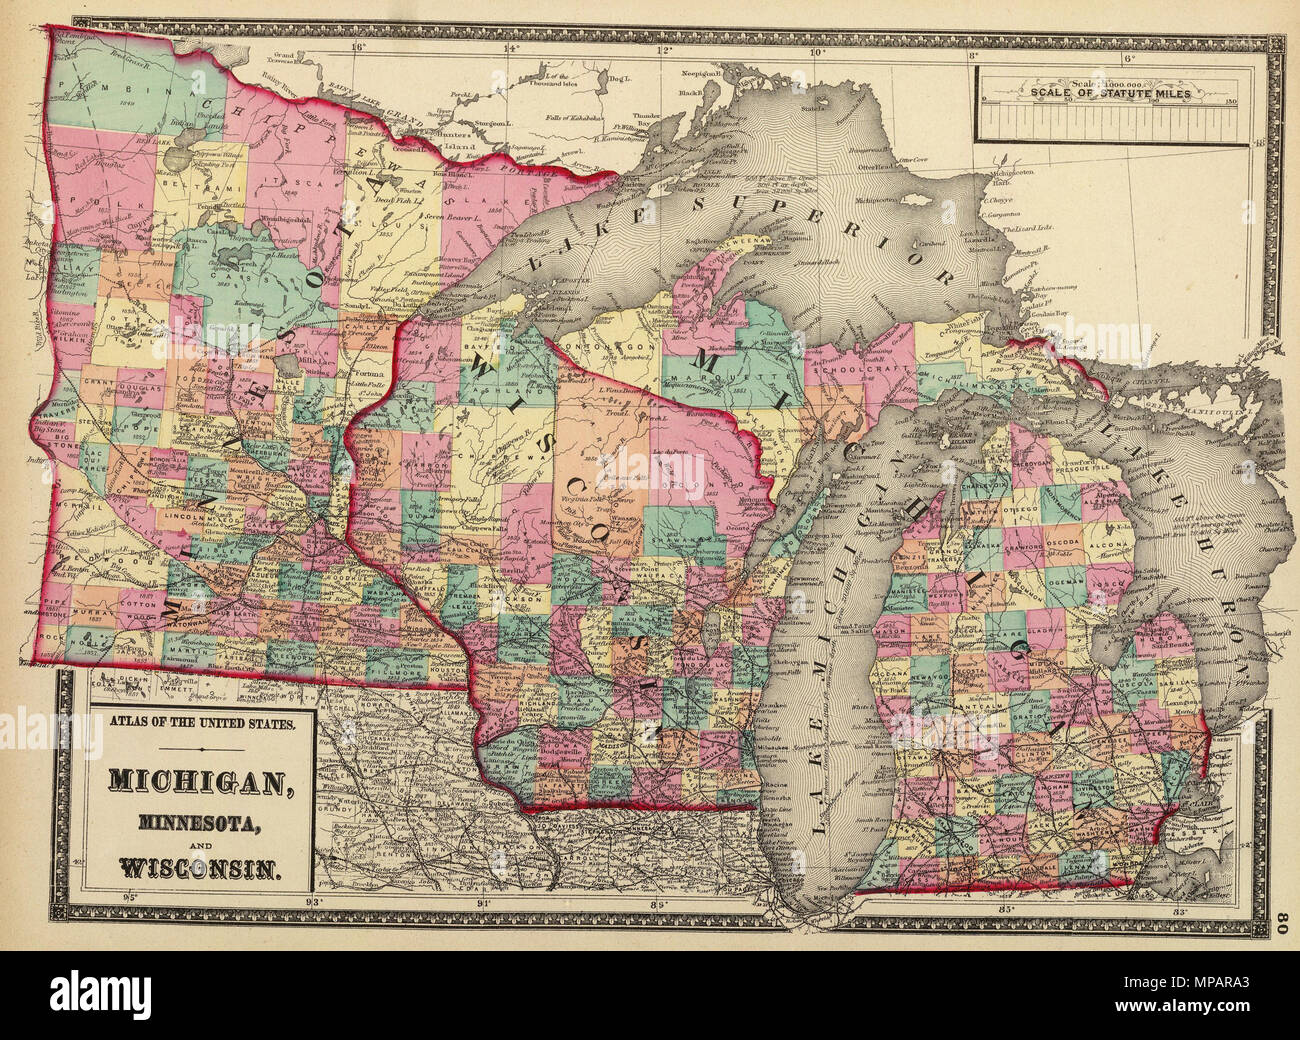 minnesota and wisconsin map English 1872 Map Of The States Of Minnesota Wisconsin And minnesota and wisconsin map